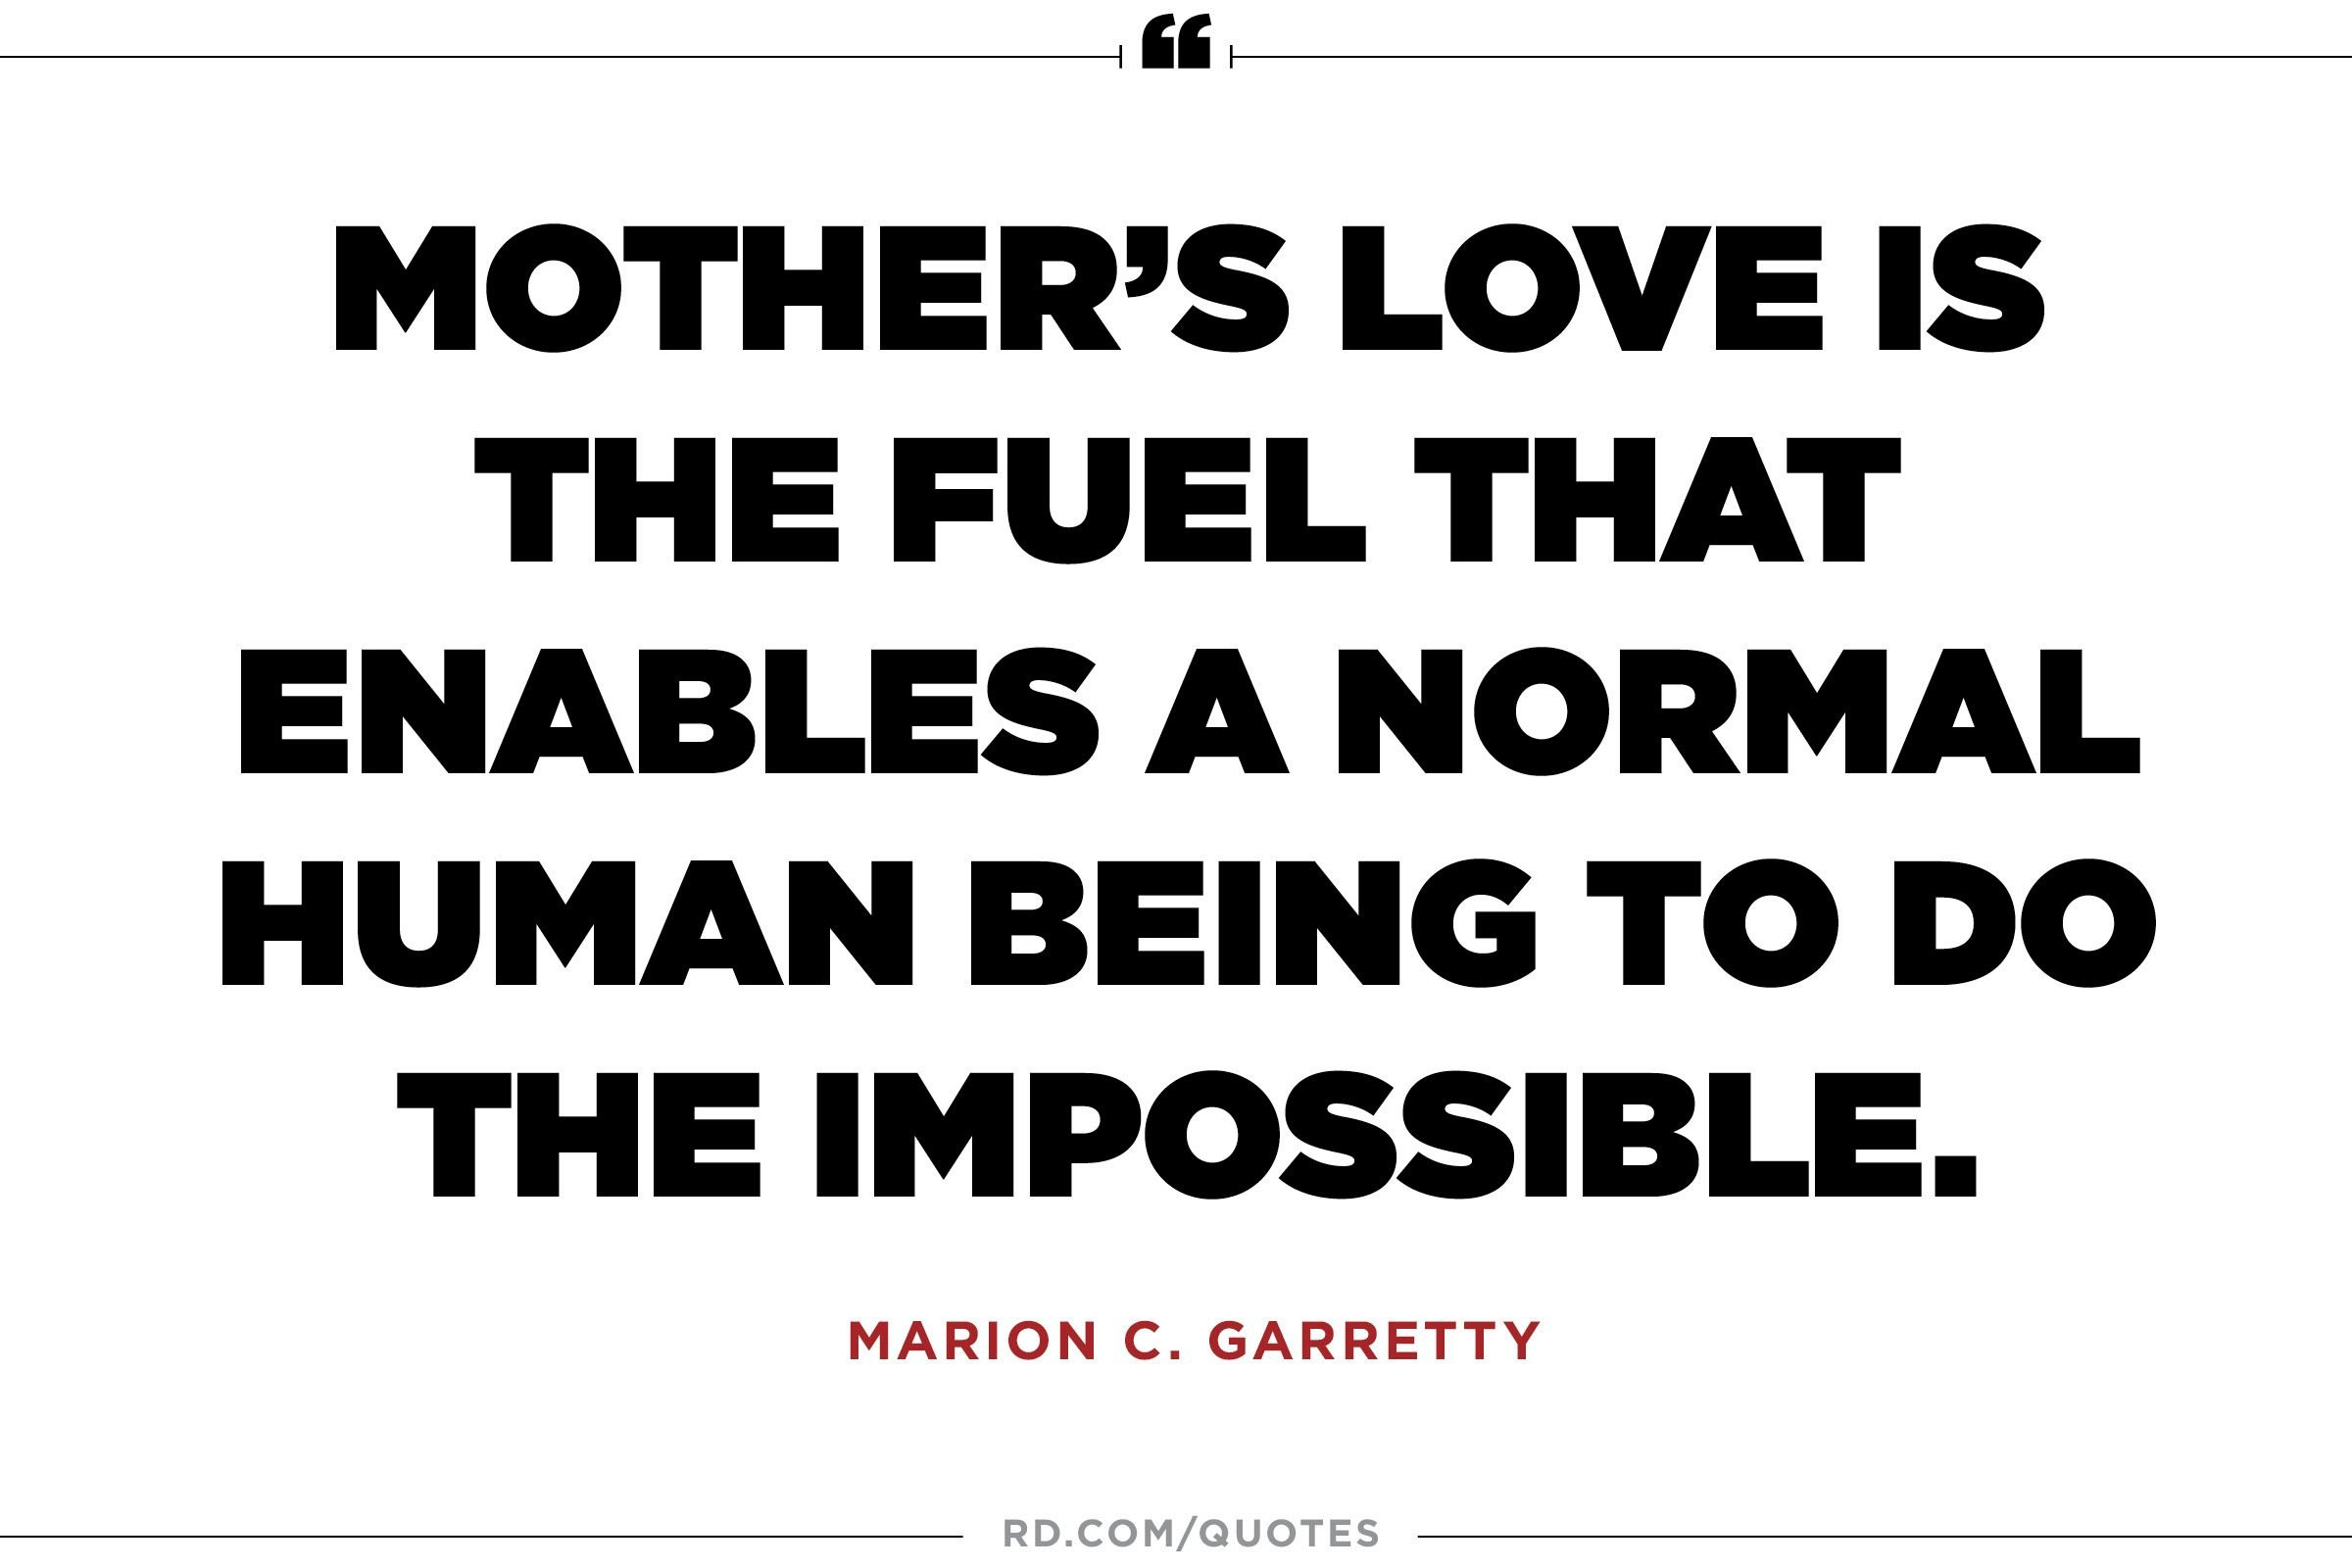 Quotes About Mothers
 11 Quotes About Mothers That ll Make You Call Yours